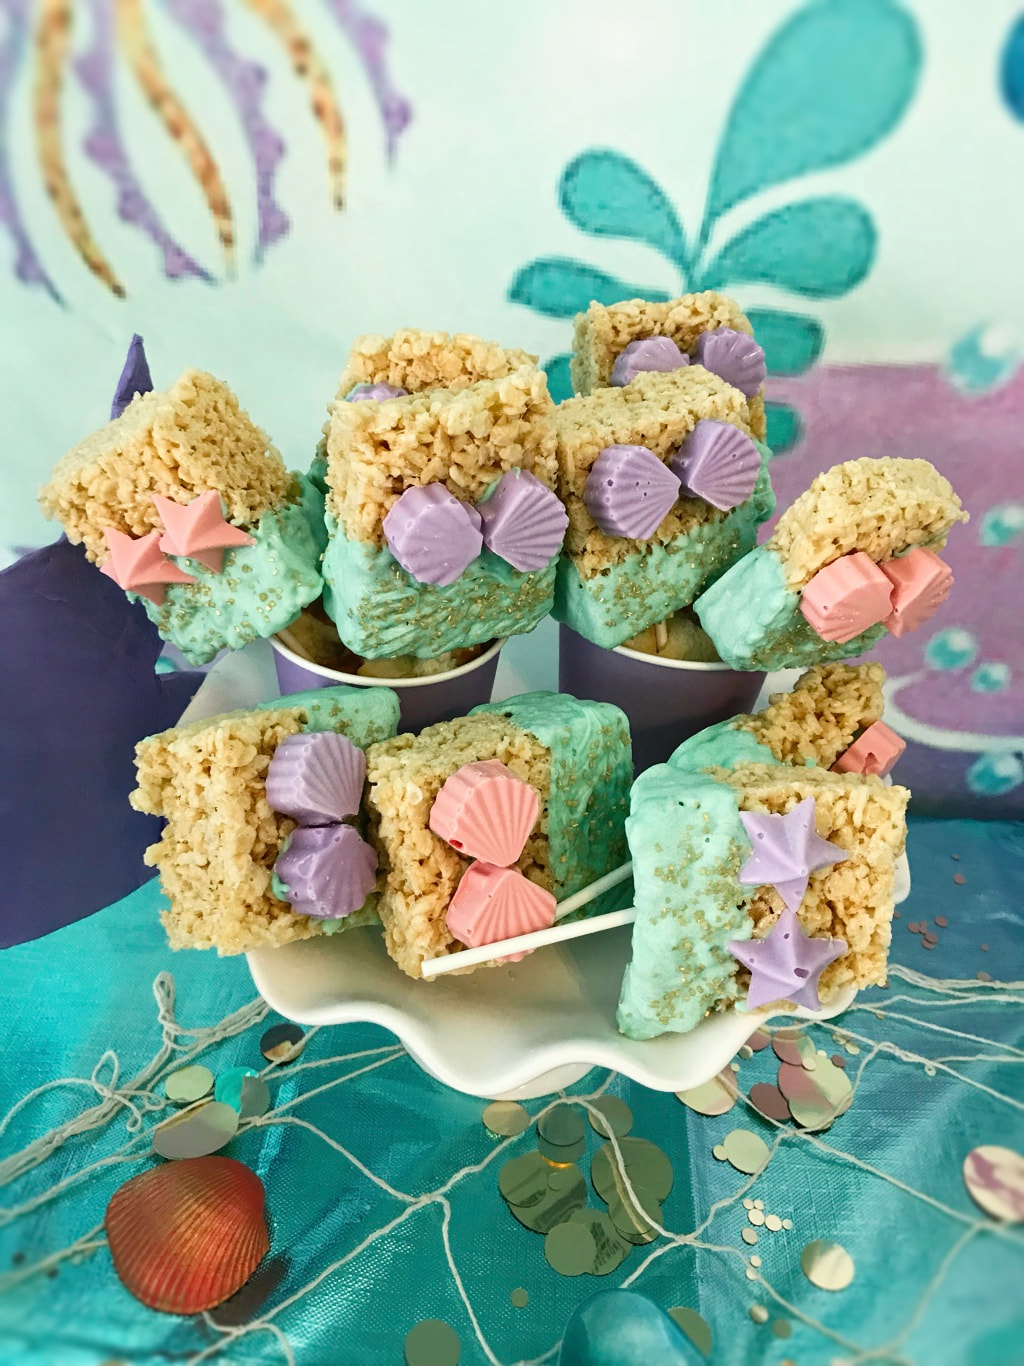 Chocolate-covered Mermaid Rice Krispies Treats for Mermaid Birthday Party - Land of Lloyds